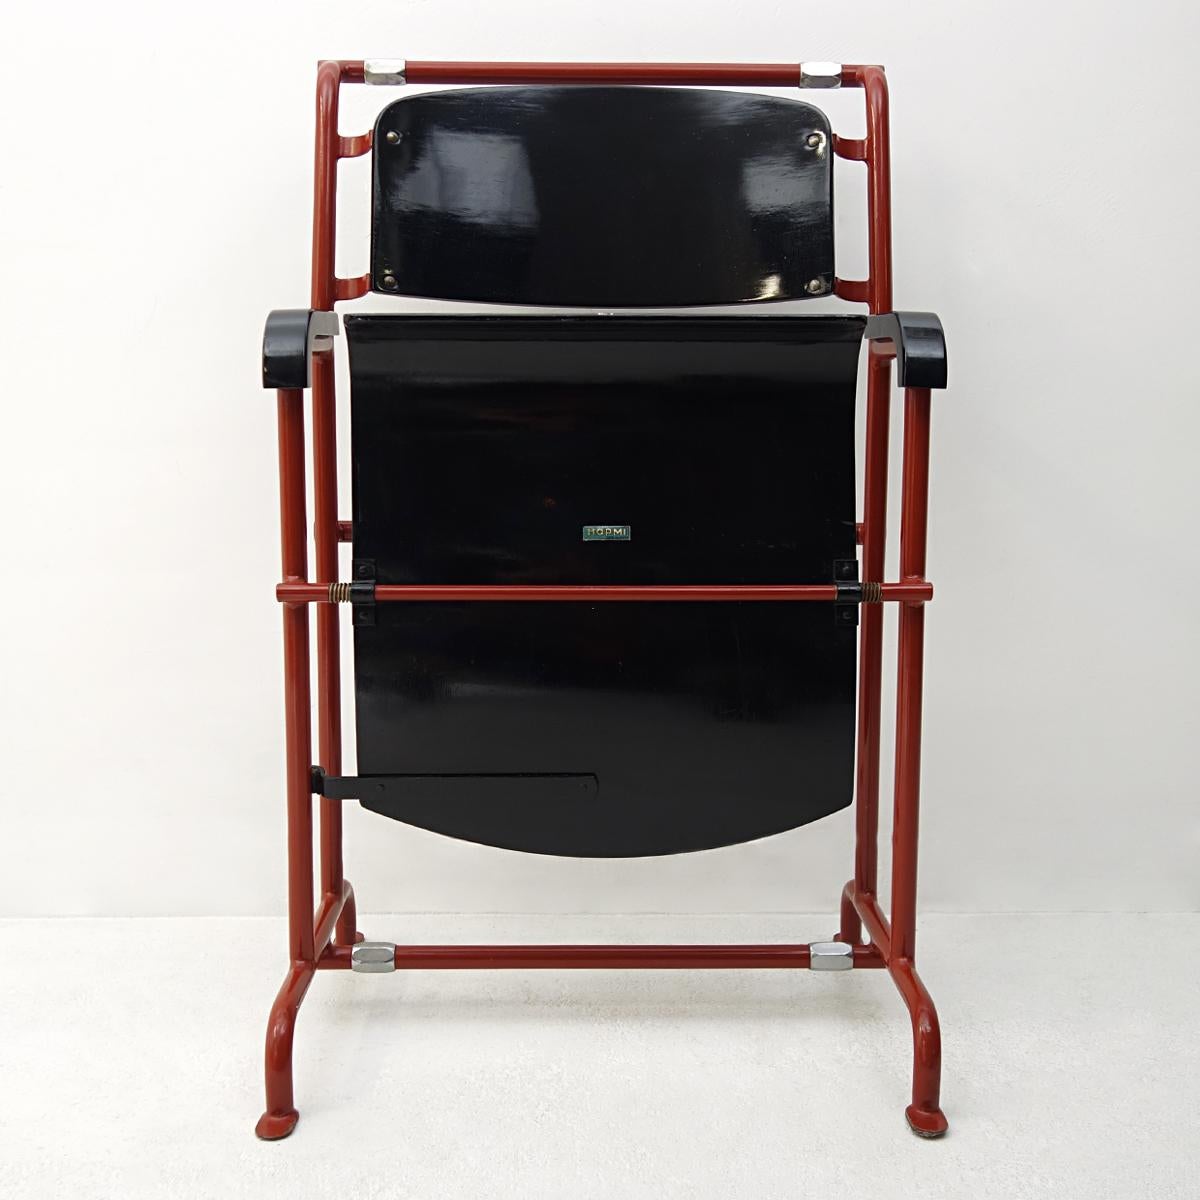 Mid-20th Century Modernist Folding Chair by Gerrit Rietveld for Hopmi in Red Metal and Black Wood